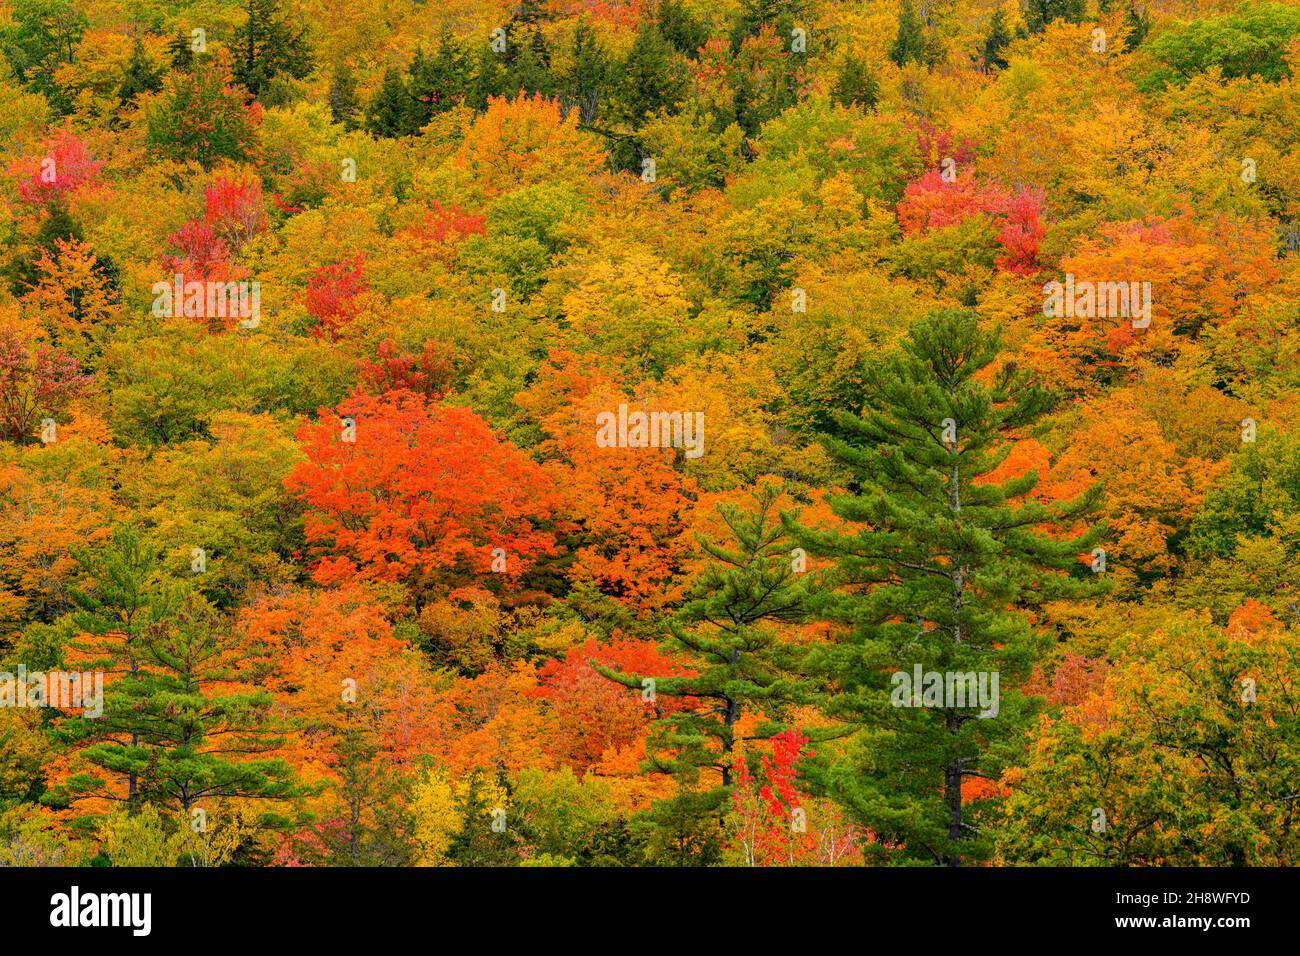 Autumn foliage in the deciduous forest on New England hillsides, Lower Falls Scenic Area, Albany, New Hampshire, USA Stock Photo